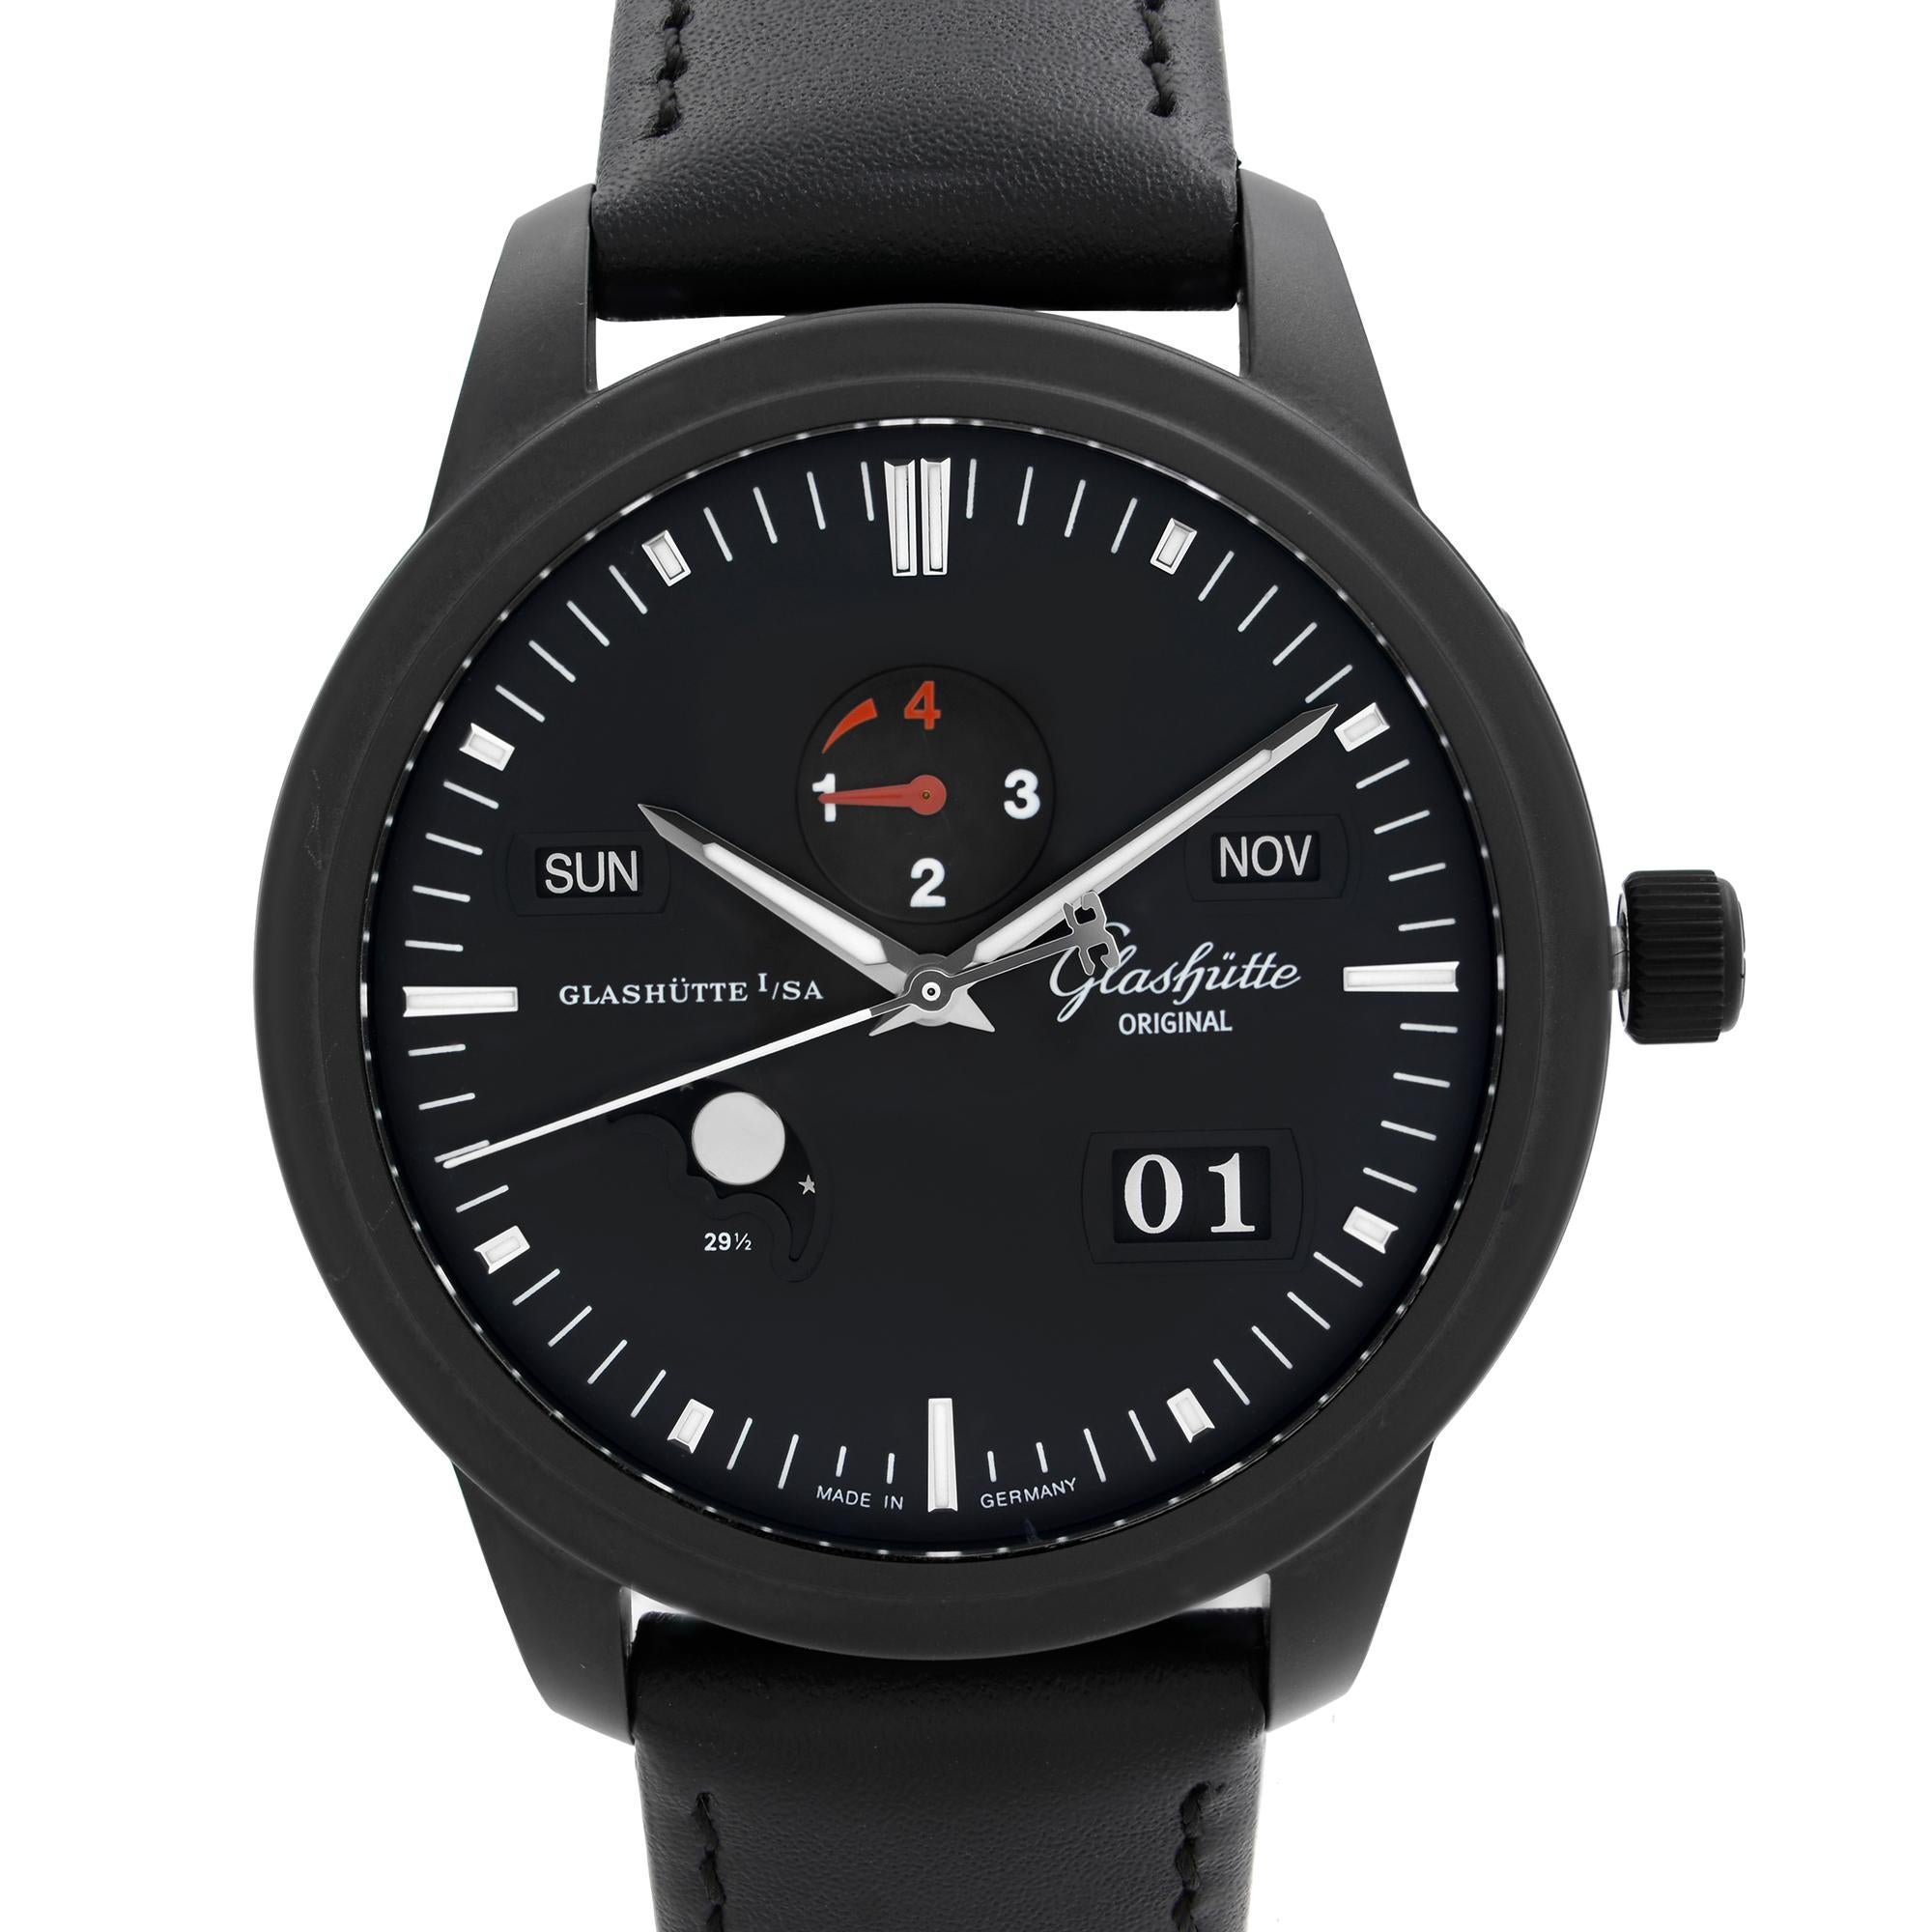 Store Display Model can have minor Blemishes. Glashutte Original Senator Perpetual Calendar Ceramic Black Dial Automatic Watch 100-07-06-06-05 This Beautiful Timepiece is Powered by Mechanical (Automatic) Movement And Features Round Black Ceramic